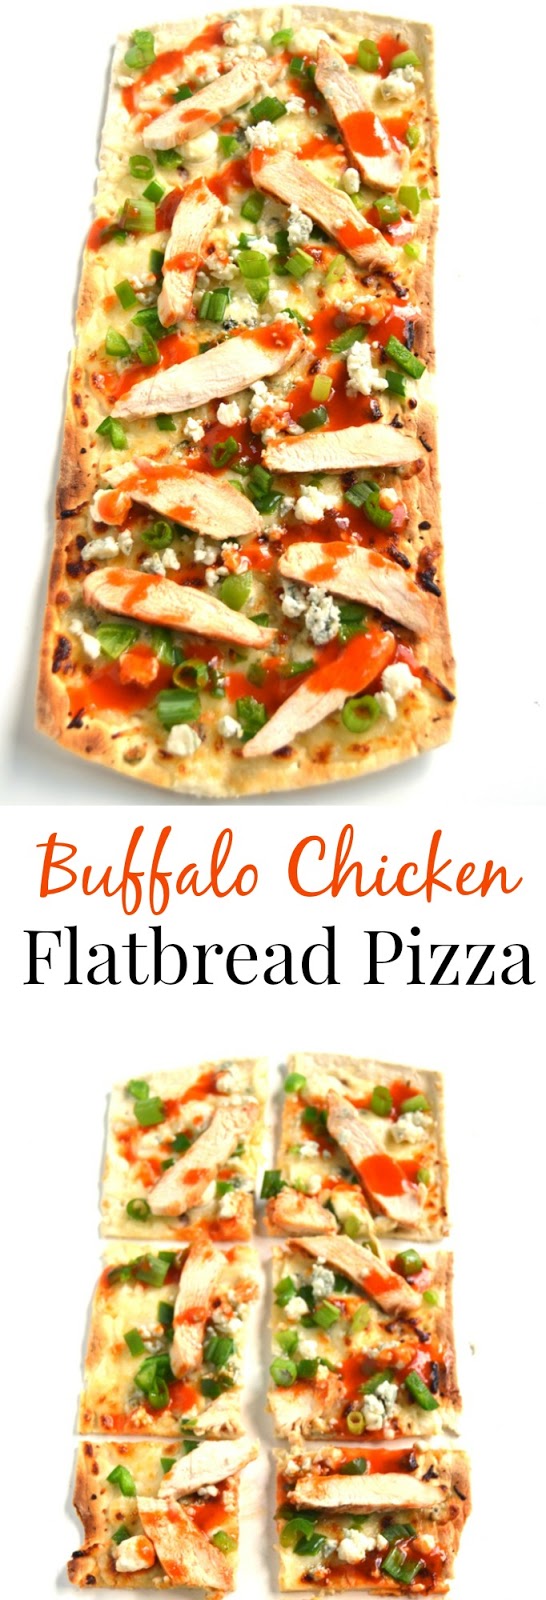 Buffalo Chicken Flatbread Pizza is easy to make and is full of flavor with spicy buffalo chicken, creamy blue cheese and flavorful green onions! www.nutritionistreviews.com